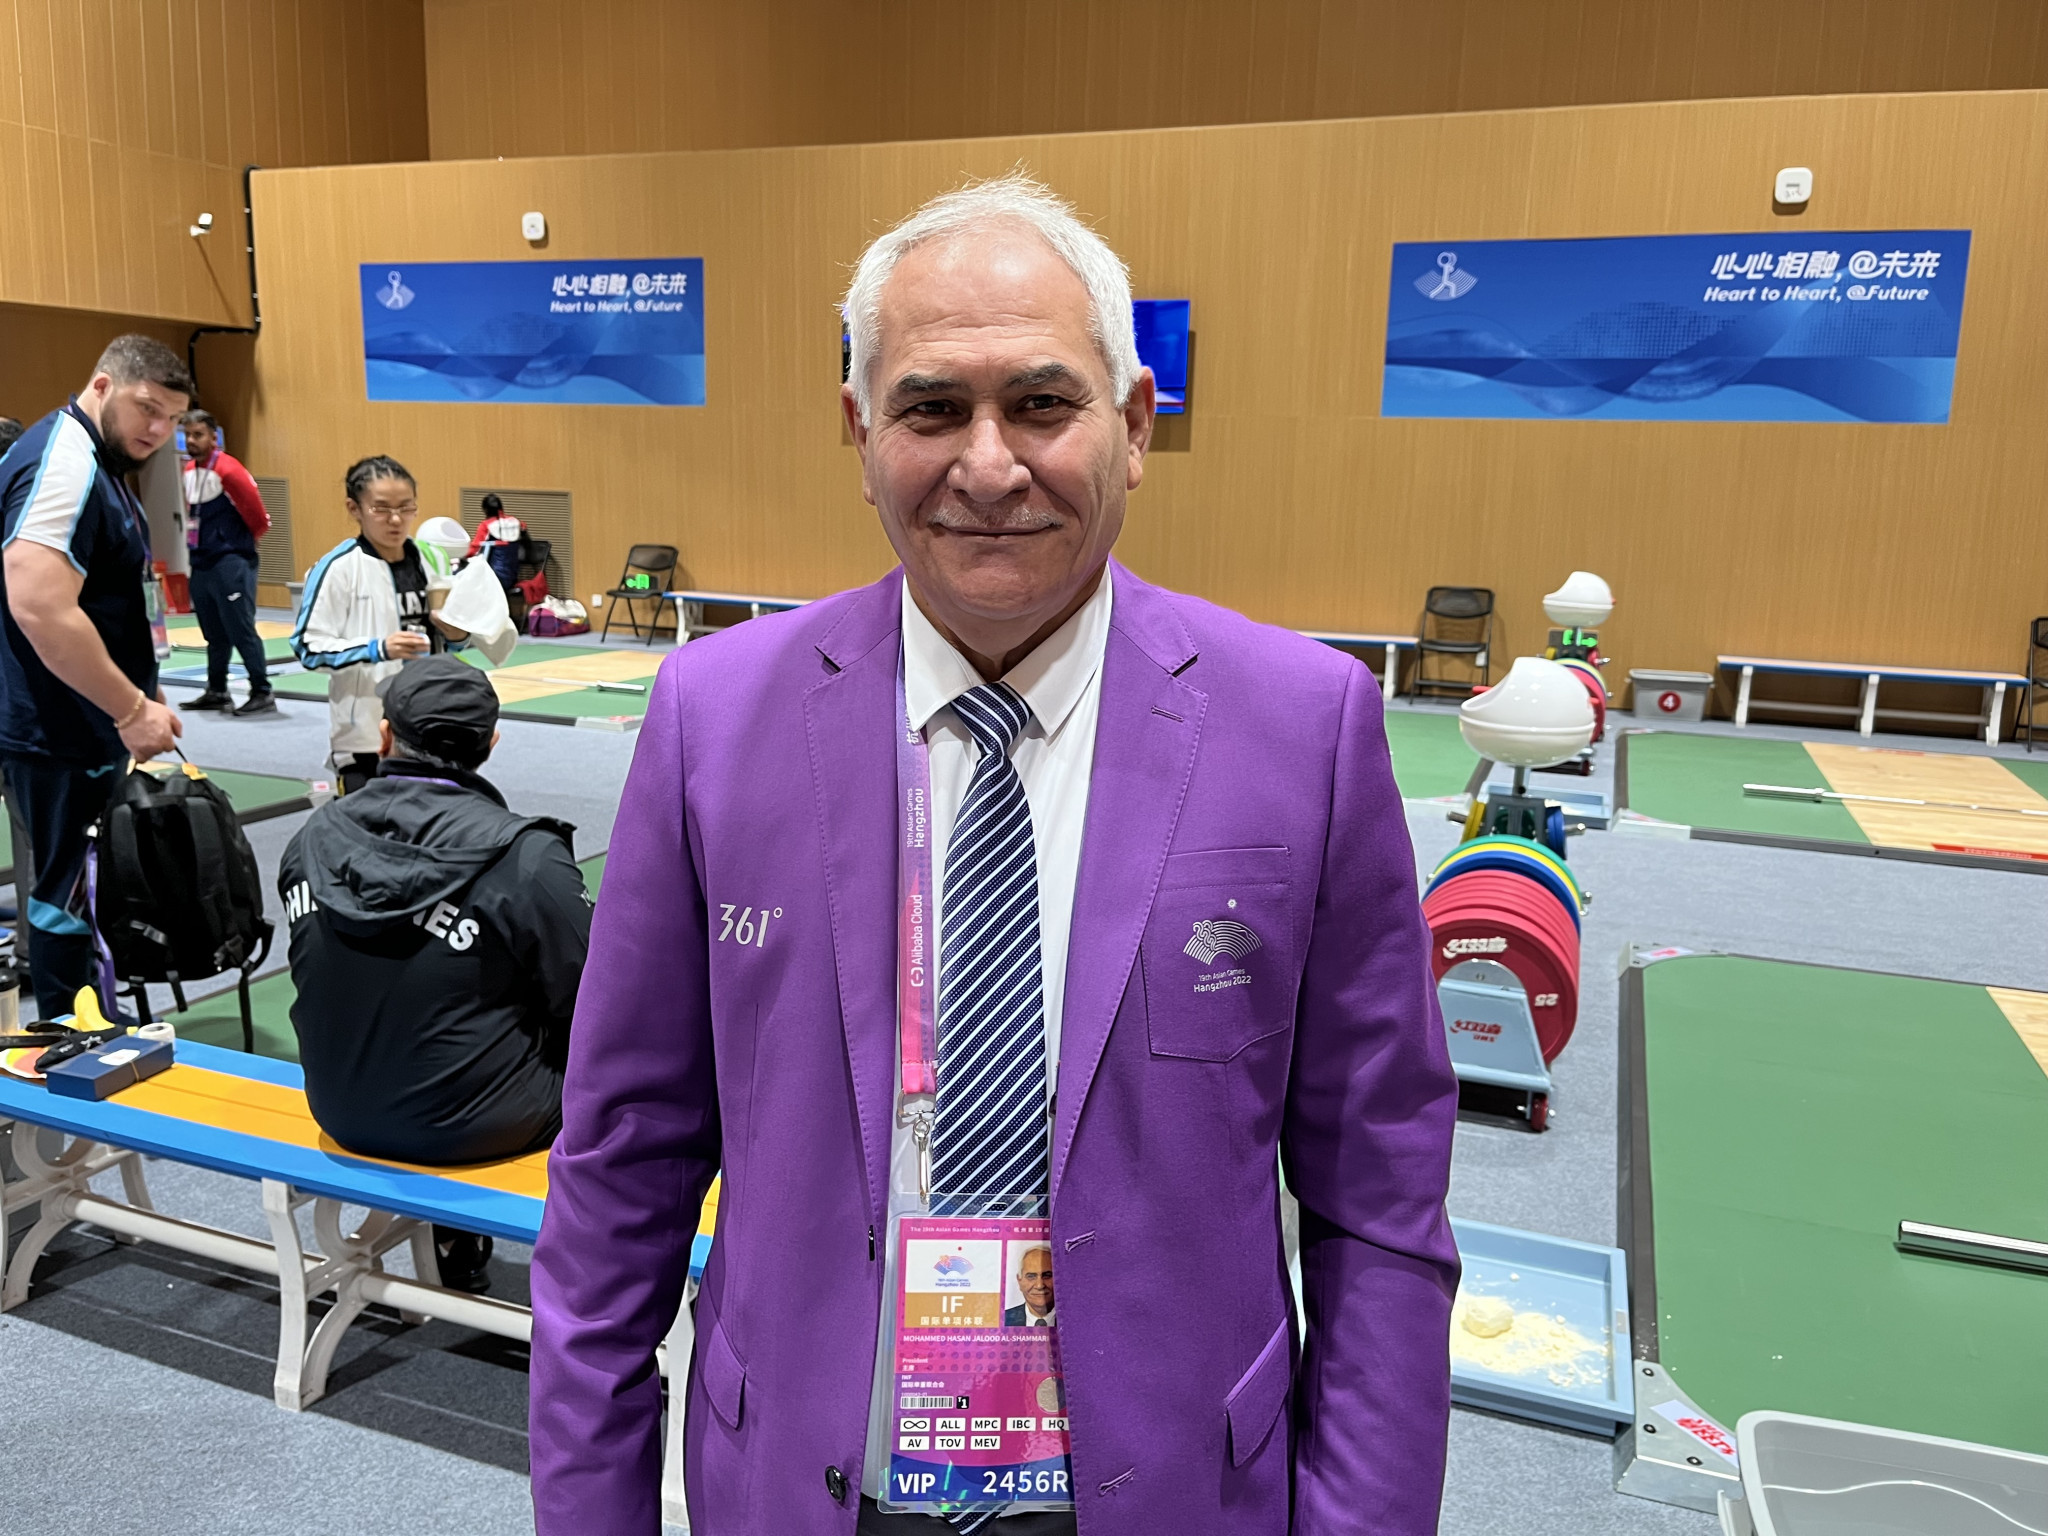 IWF President Mohammed Jalood was praised by his colleagues for his part in weightlifting's reforms ©ITG (Image obtained at insidethegames.biz)